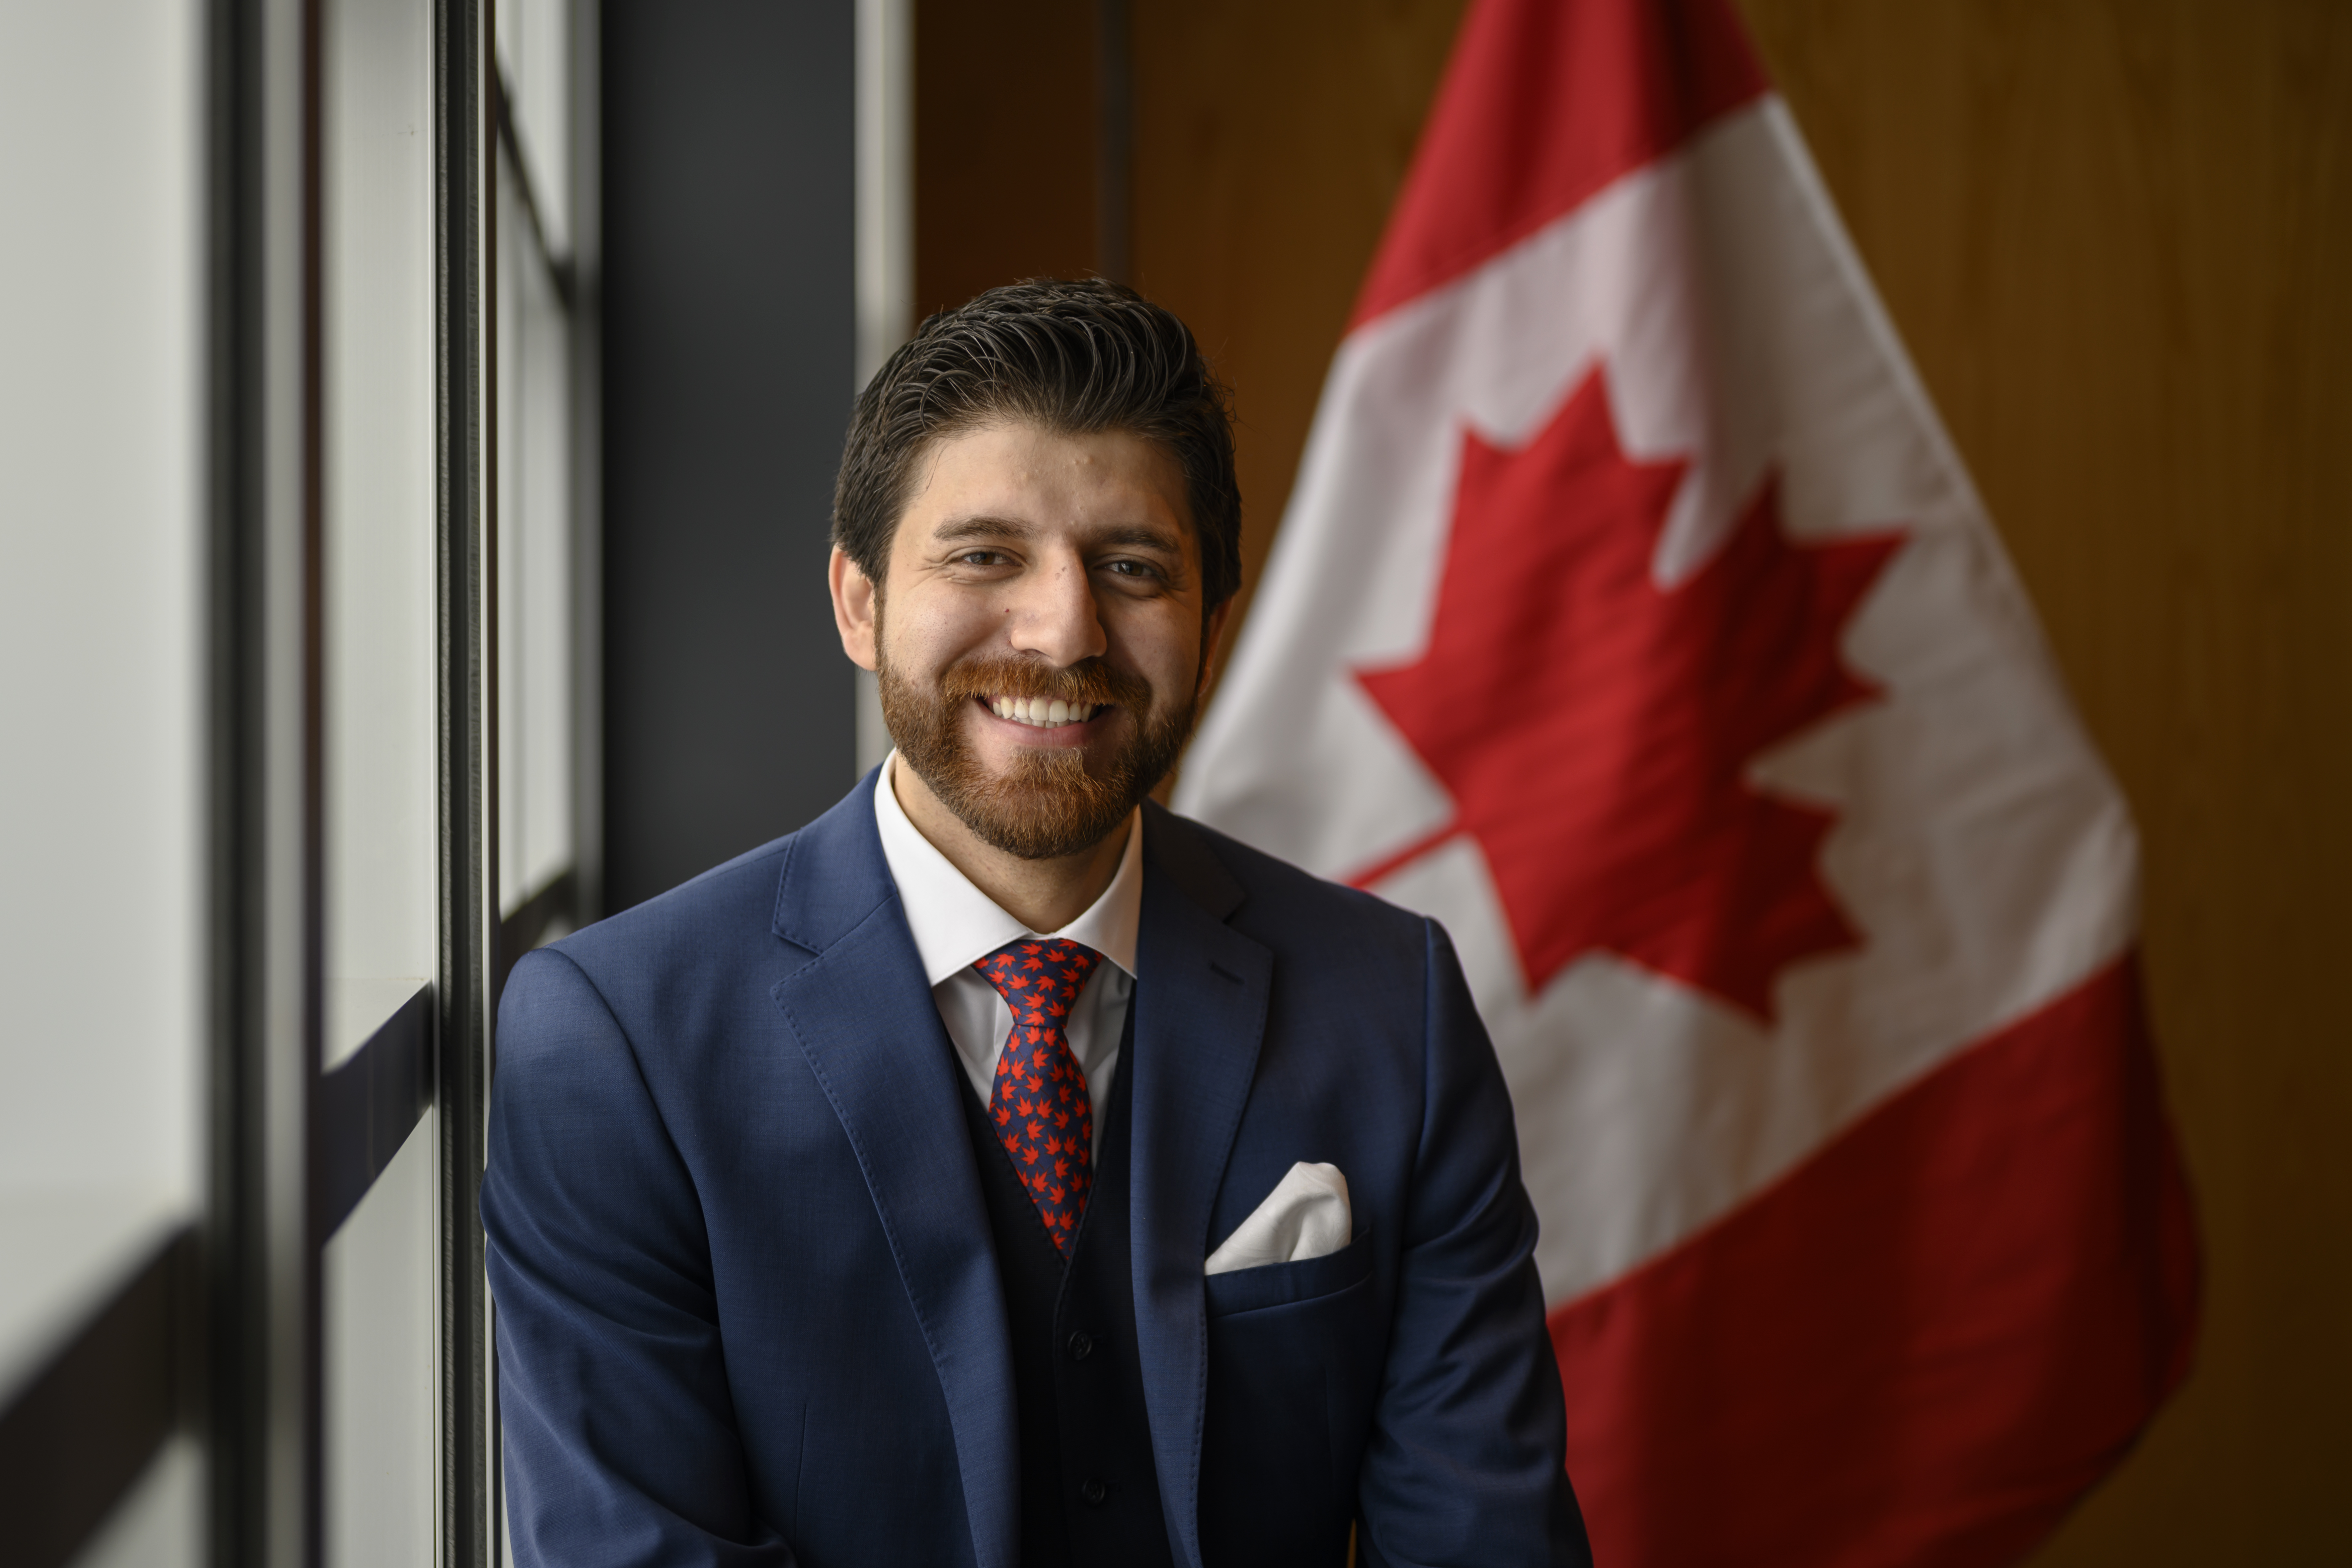 Tareq Hadhad, a Syrian refugee and founder of Peace by Chocolate, poses prior to his Canadian citizenship ceremony at Pier 21 in Halifax, Nova Scotia